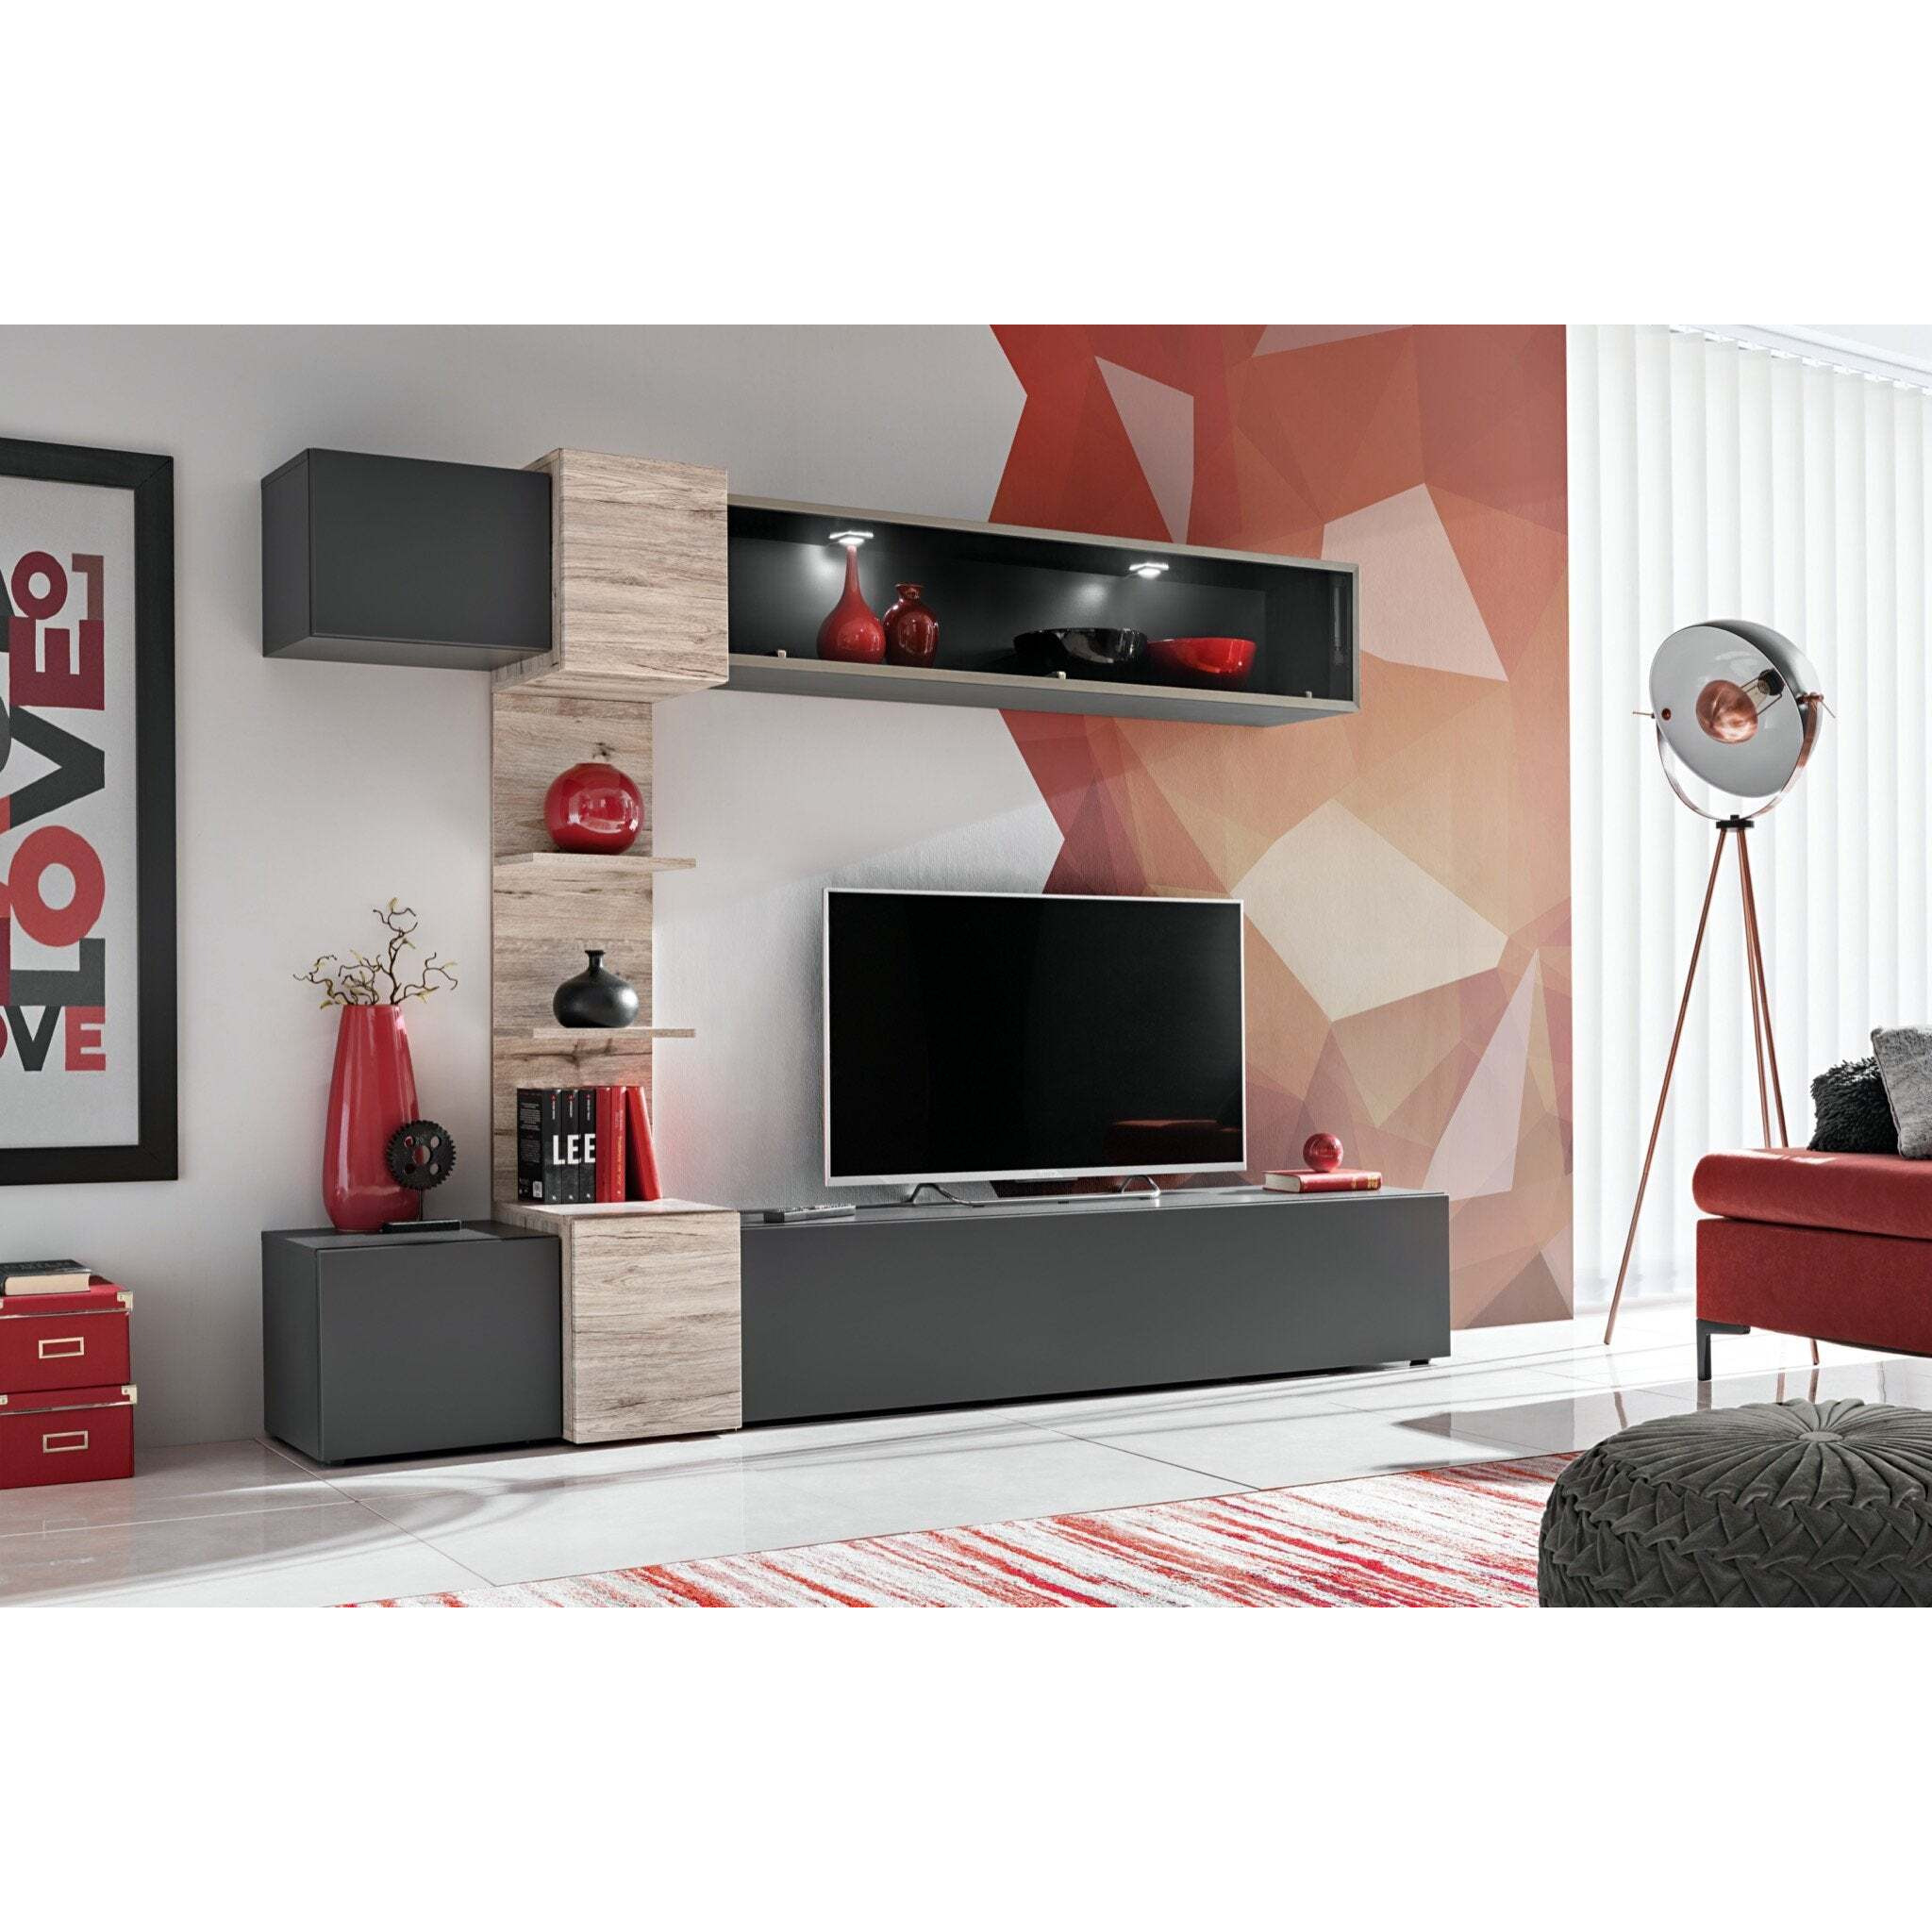 "Rio Entertainment Unit For TVs Up To 60"" - Anthracite 230cm" - image 1